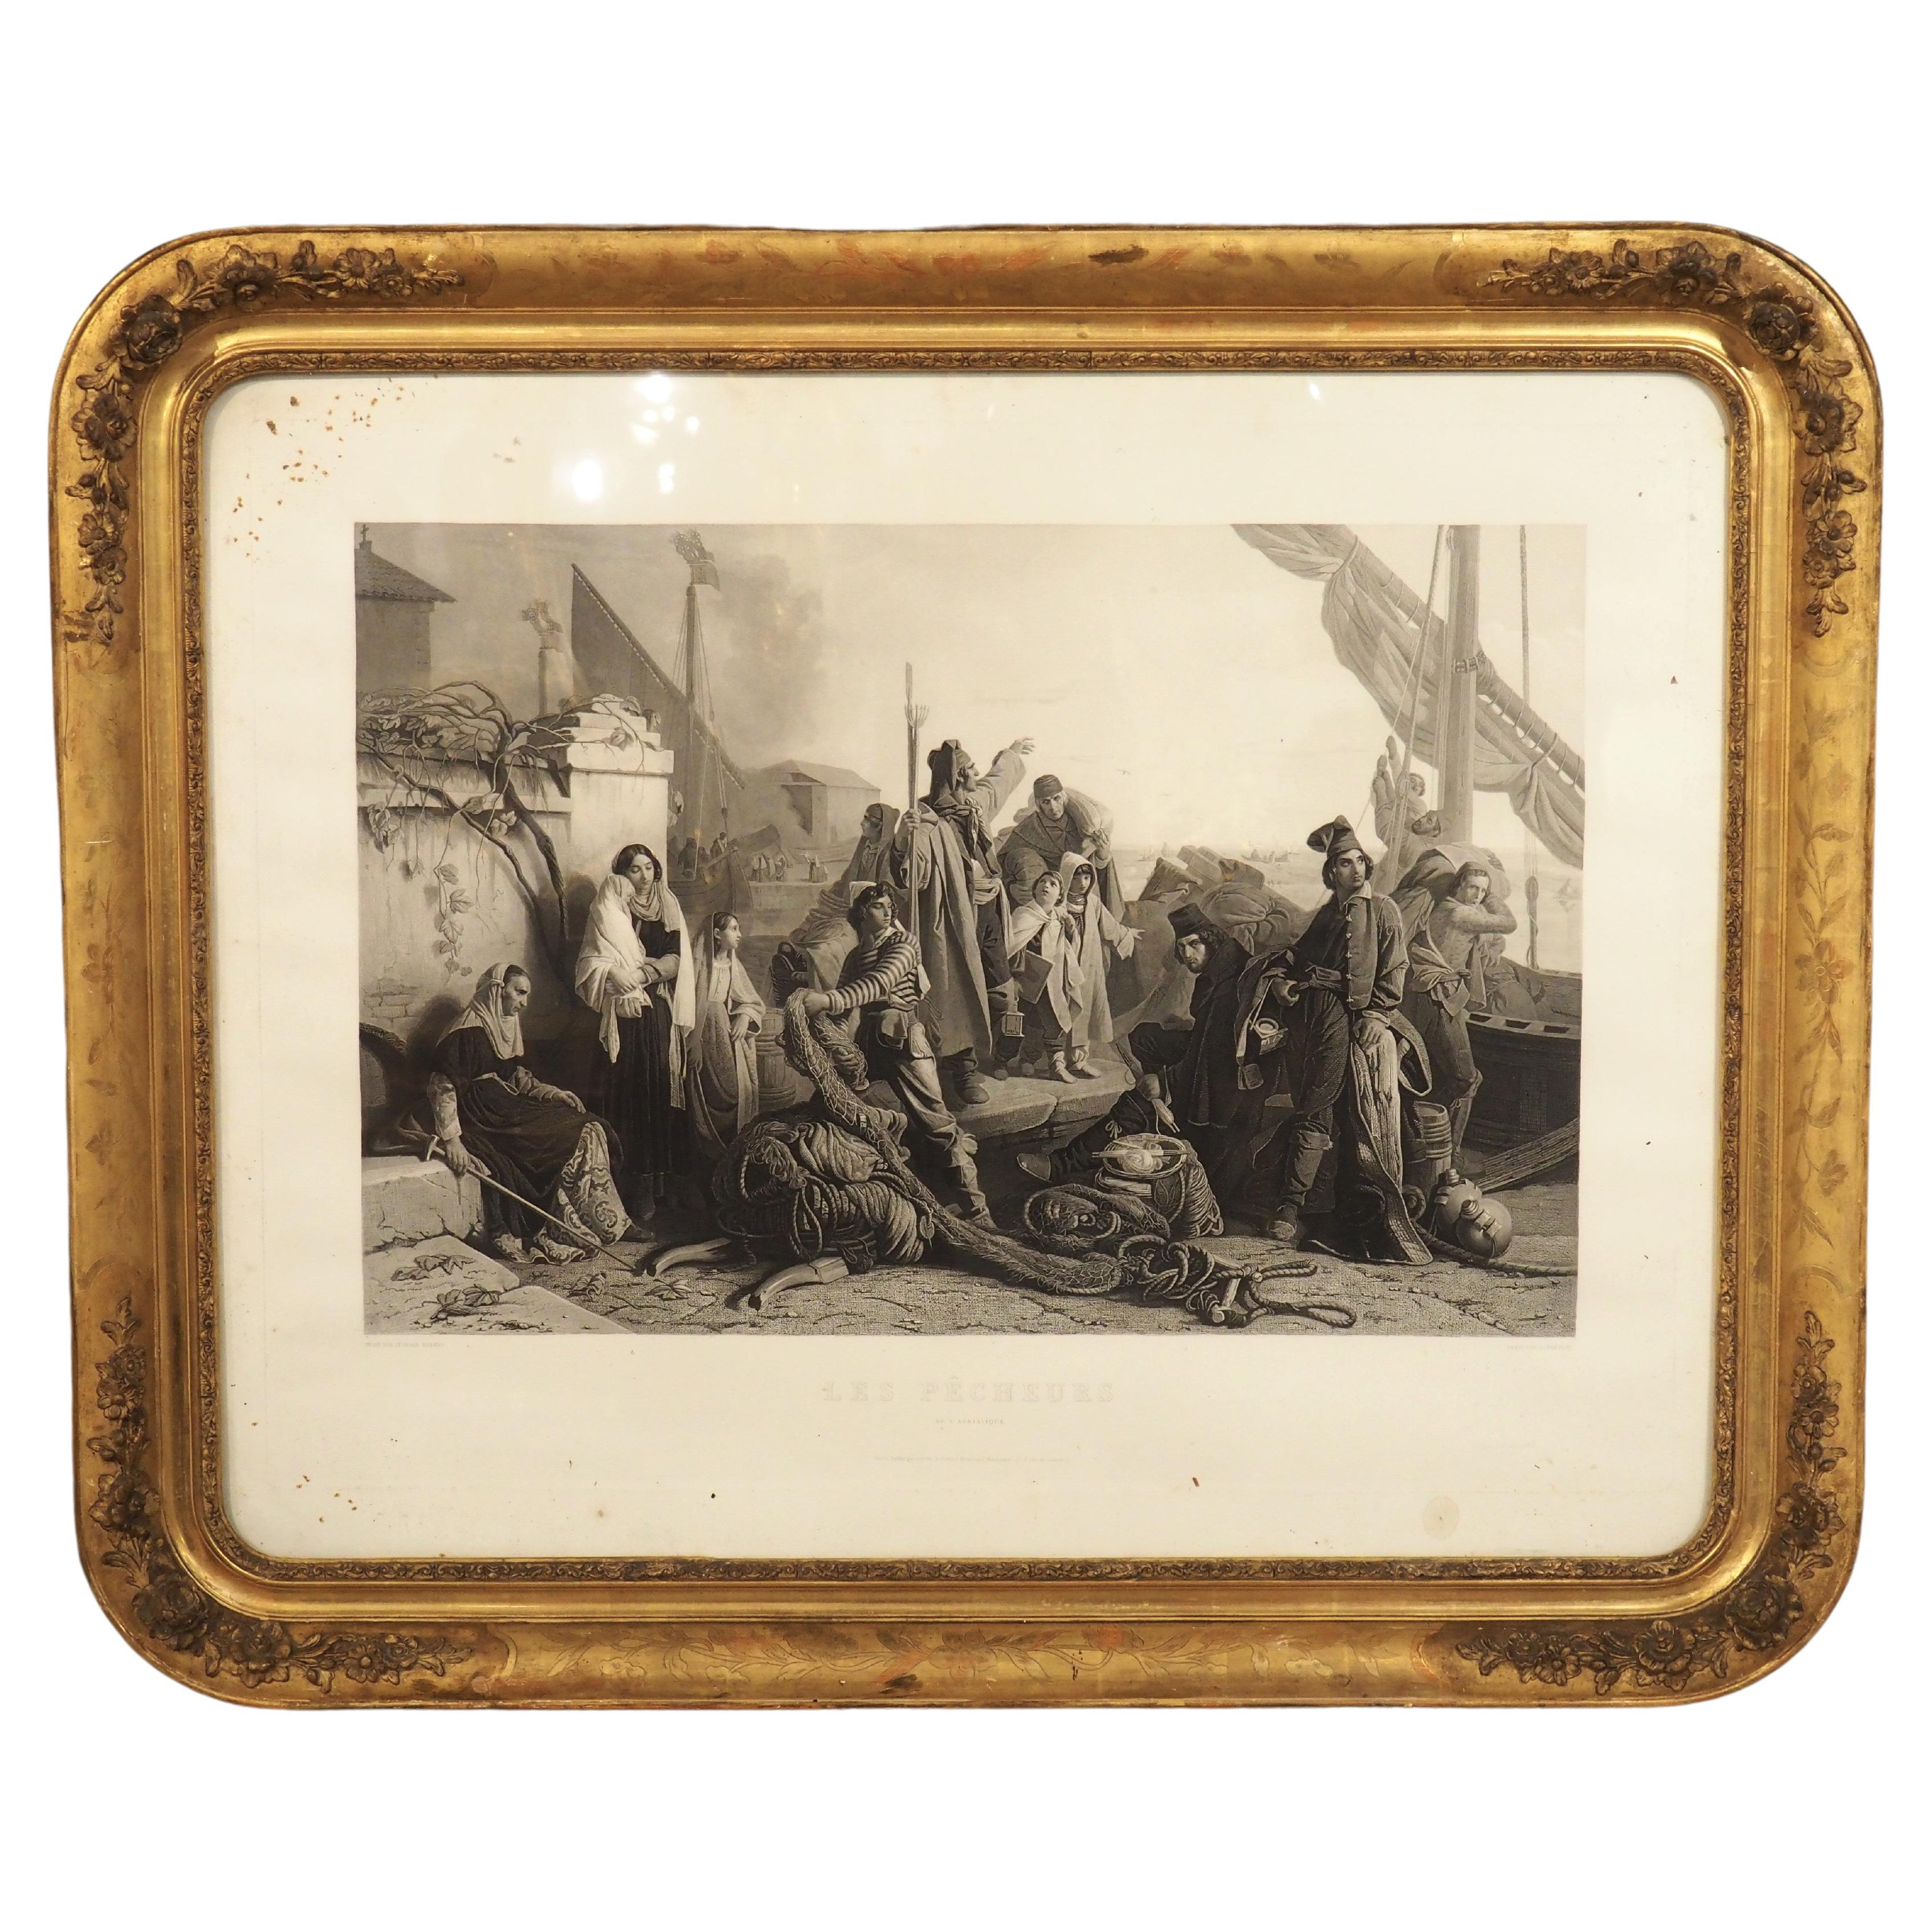 19th Century French Engraving in Giltwood Frame, 'The Fishermen of the Adriatic'